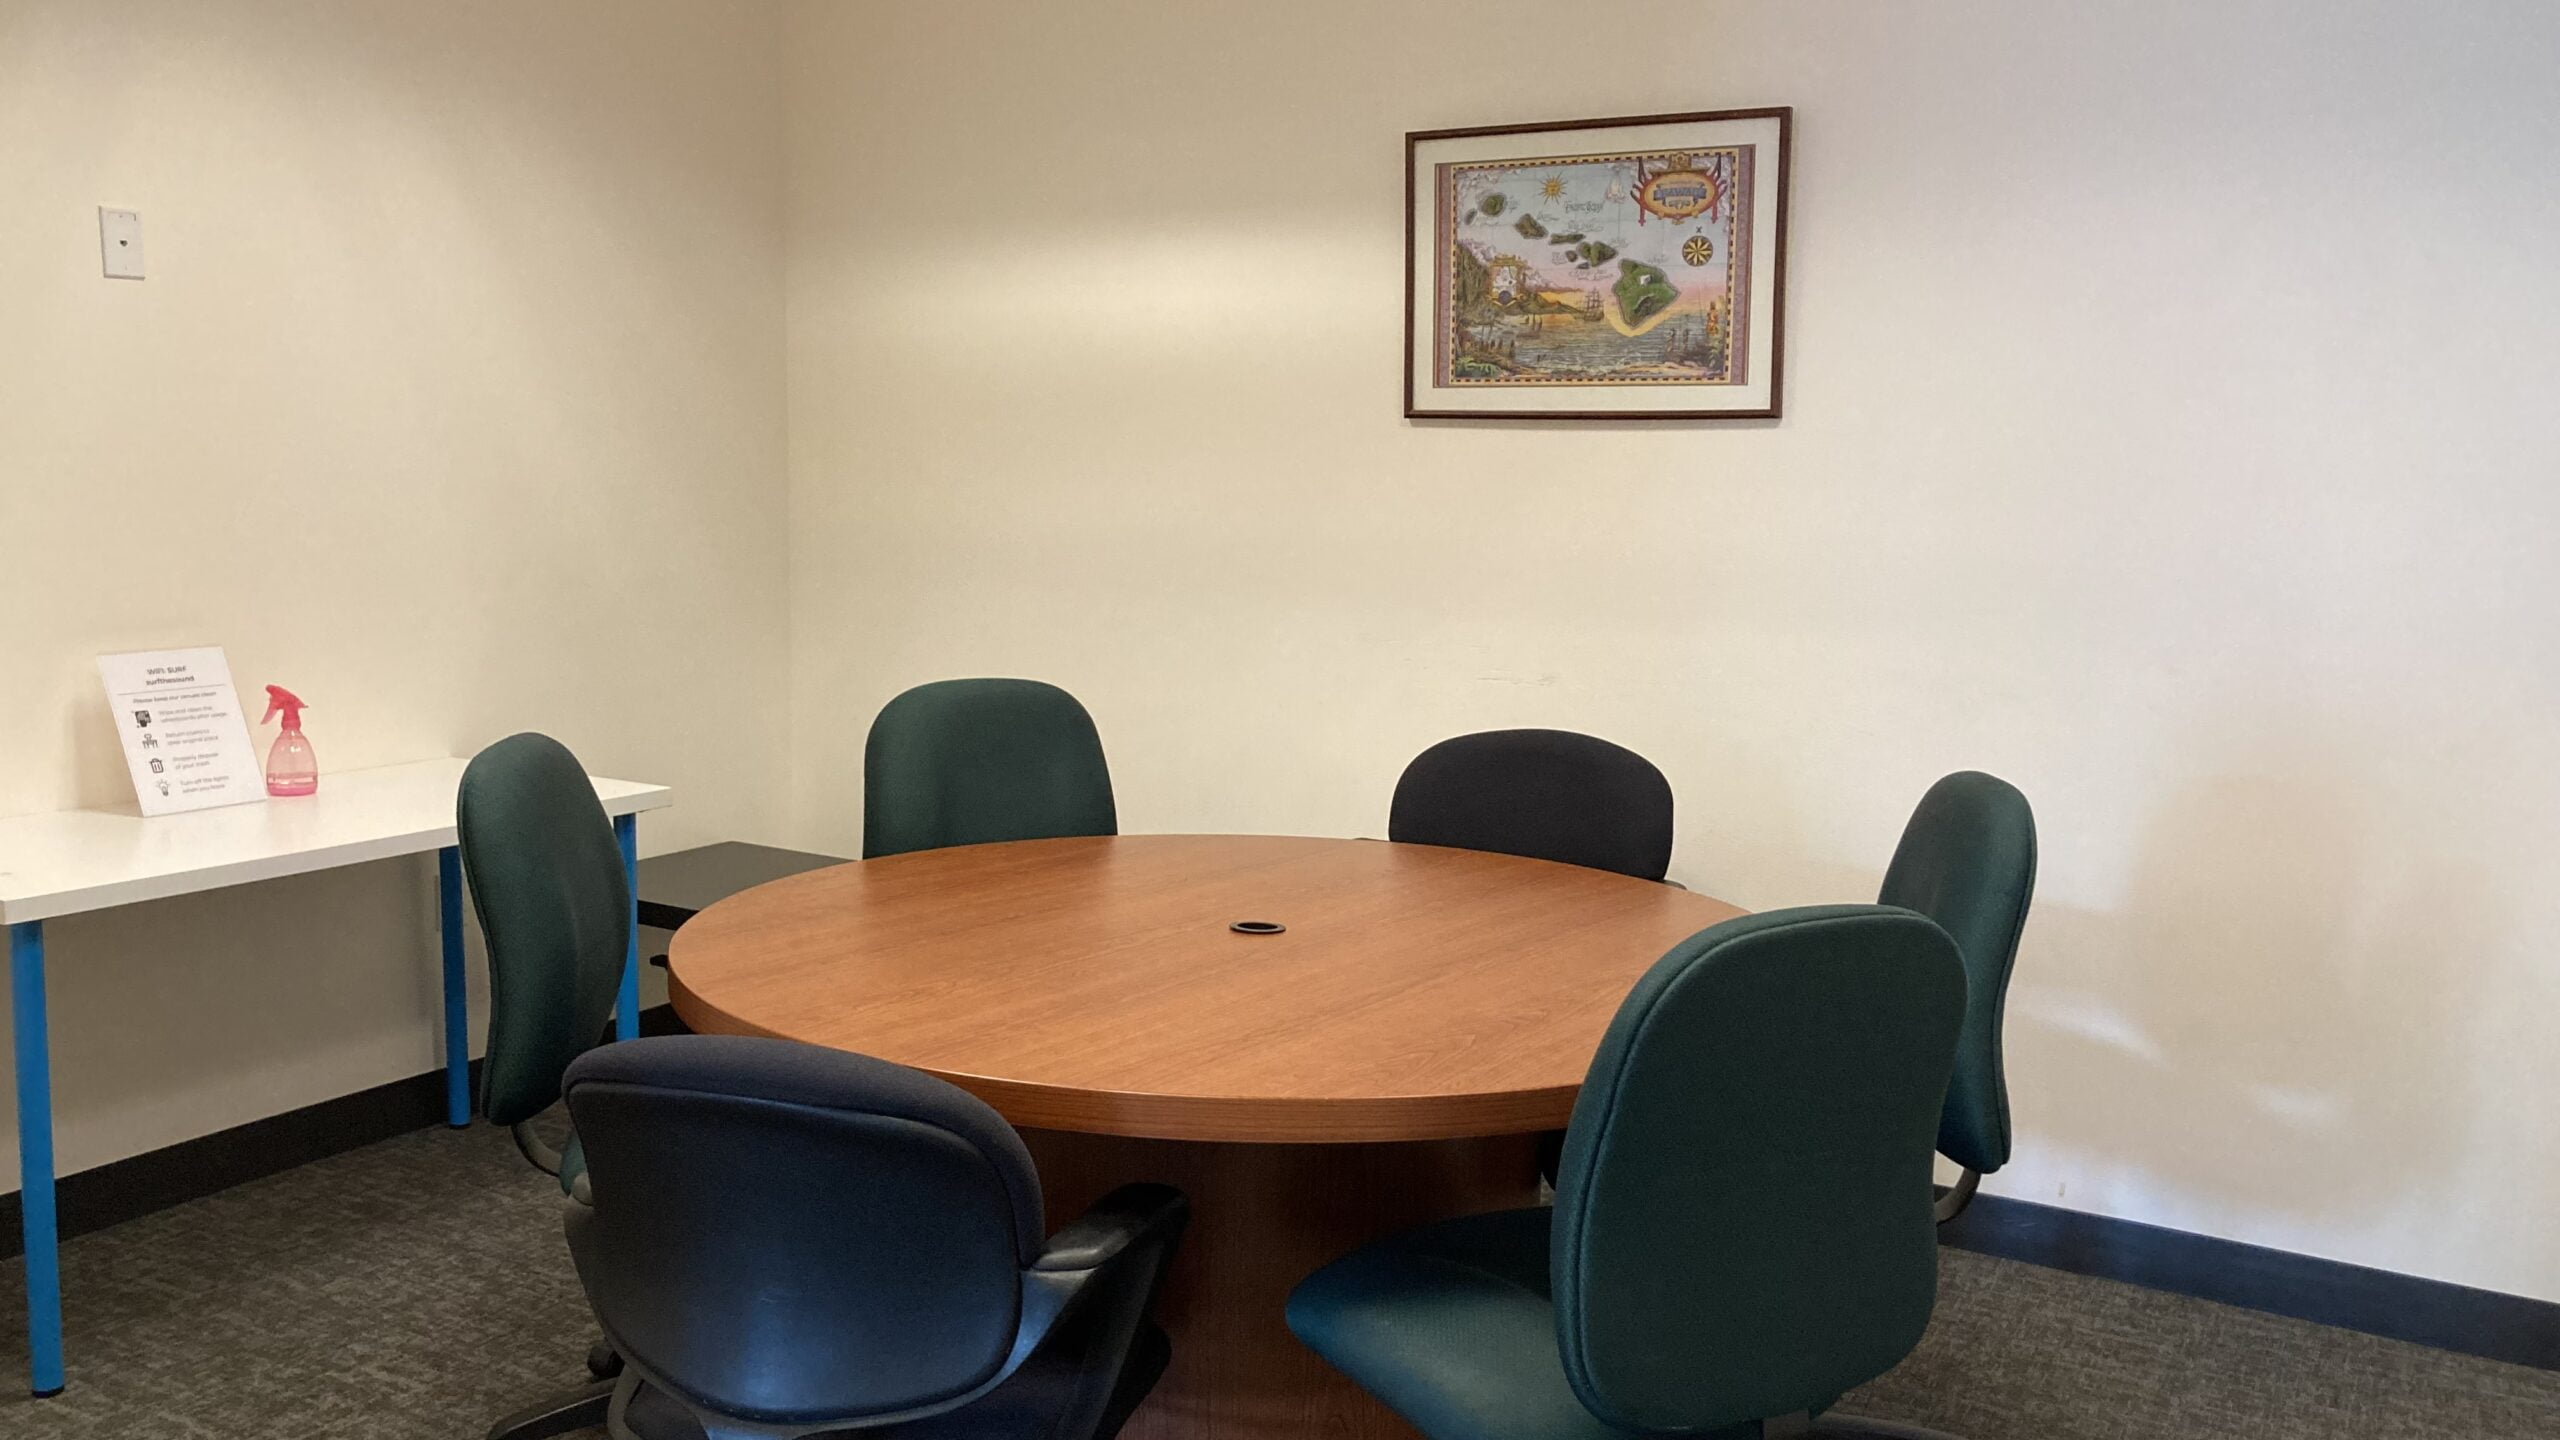 Hawaii private meeting room for rent by the hour at SURF Incubator in Downtown Seattle Washington